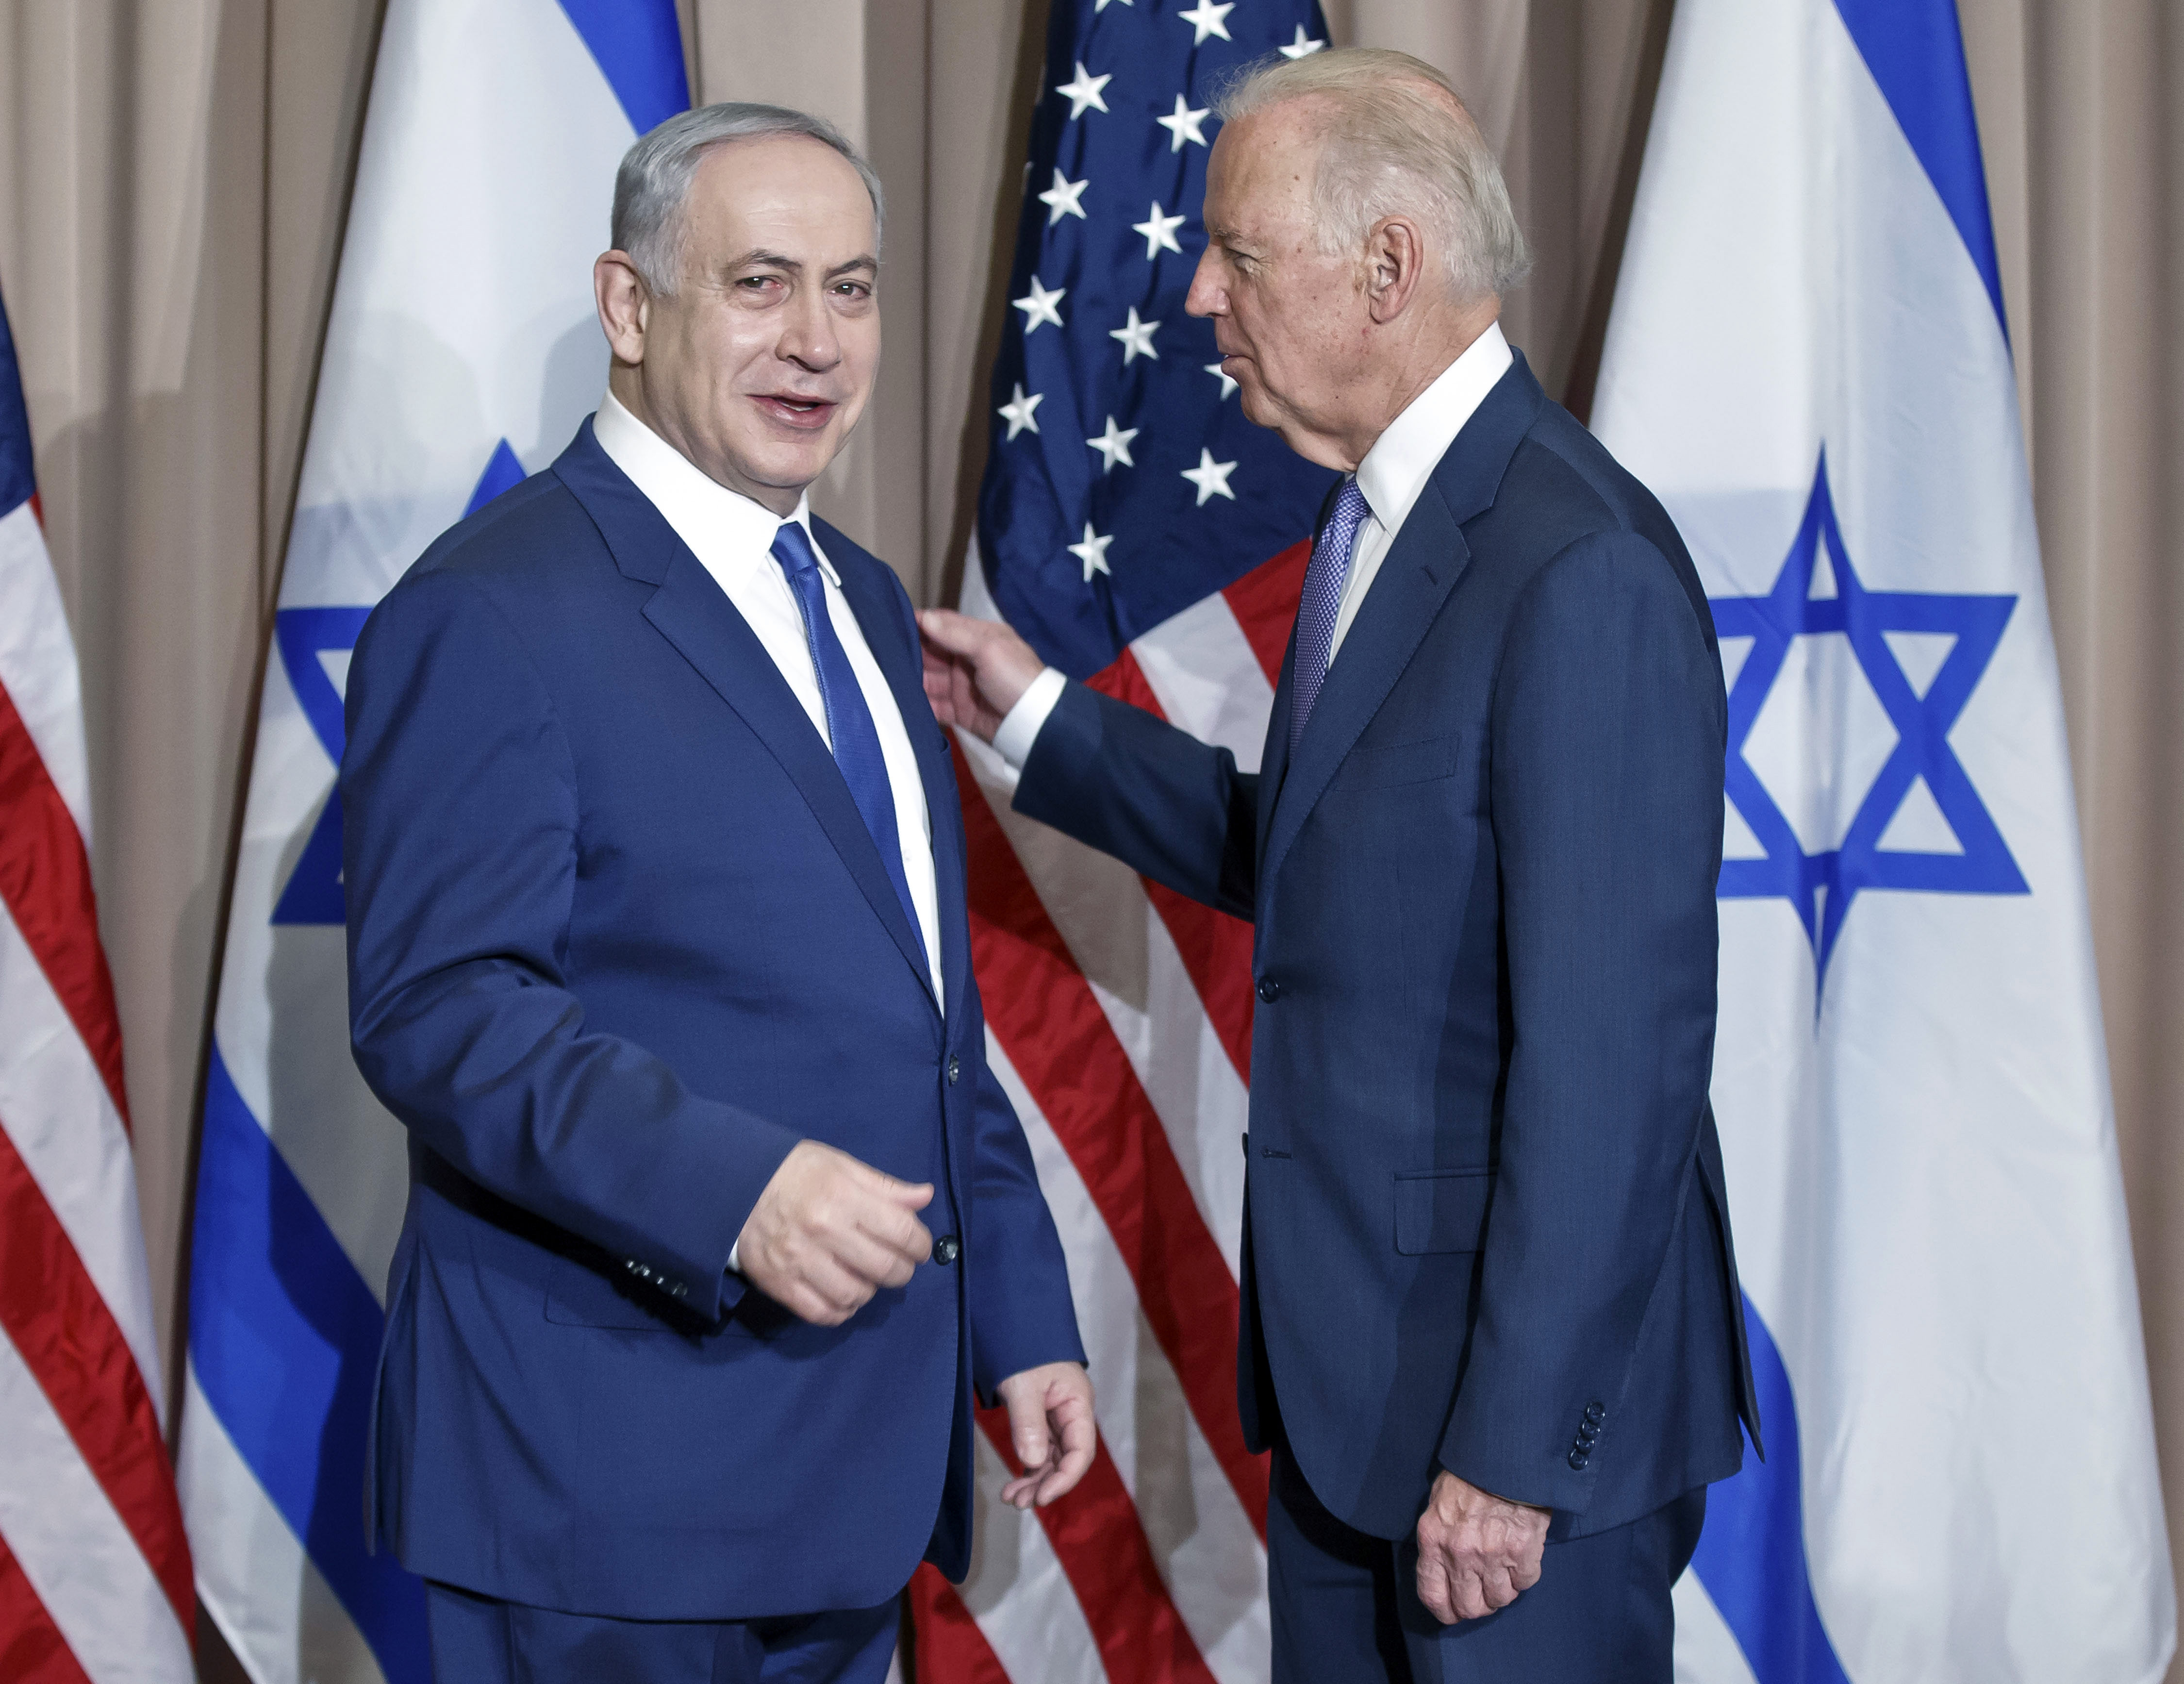 Israeli Prime Minister Benjamin Netanyahu, left, and US Vice-President Joe Biden pose for the media prior to a meeting on the sidelines of the World Economic Forum in Davos, Switzerland, Thursday, Jan. 21, 2016. The meeting comes less than a week after a diplomatic breakthrough between the U.S. and Iran that has put Israel's government on edge.(AP Photo/Michel Euler)